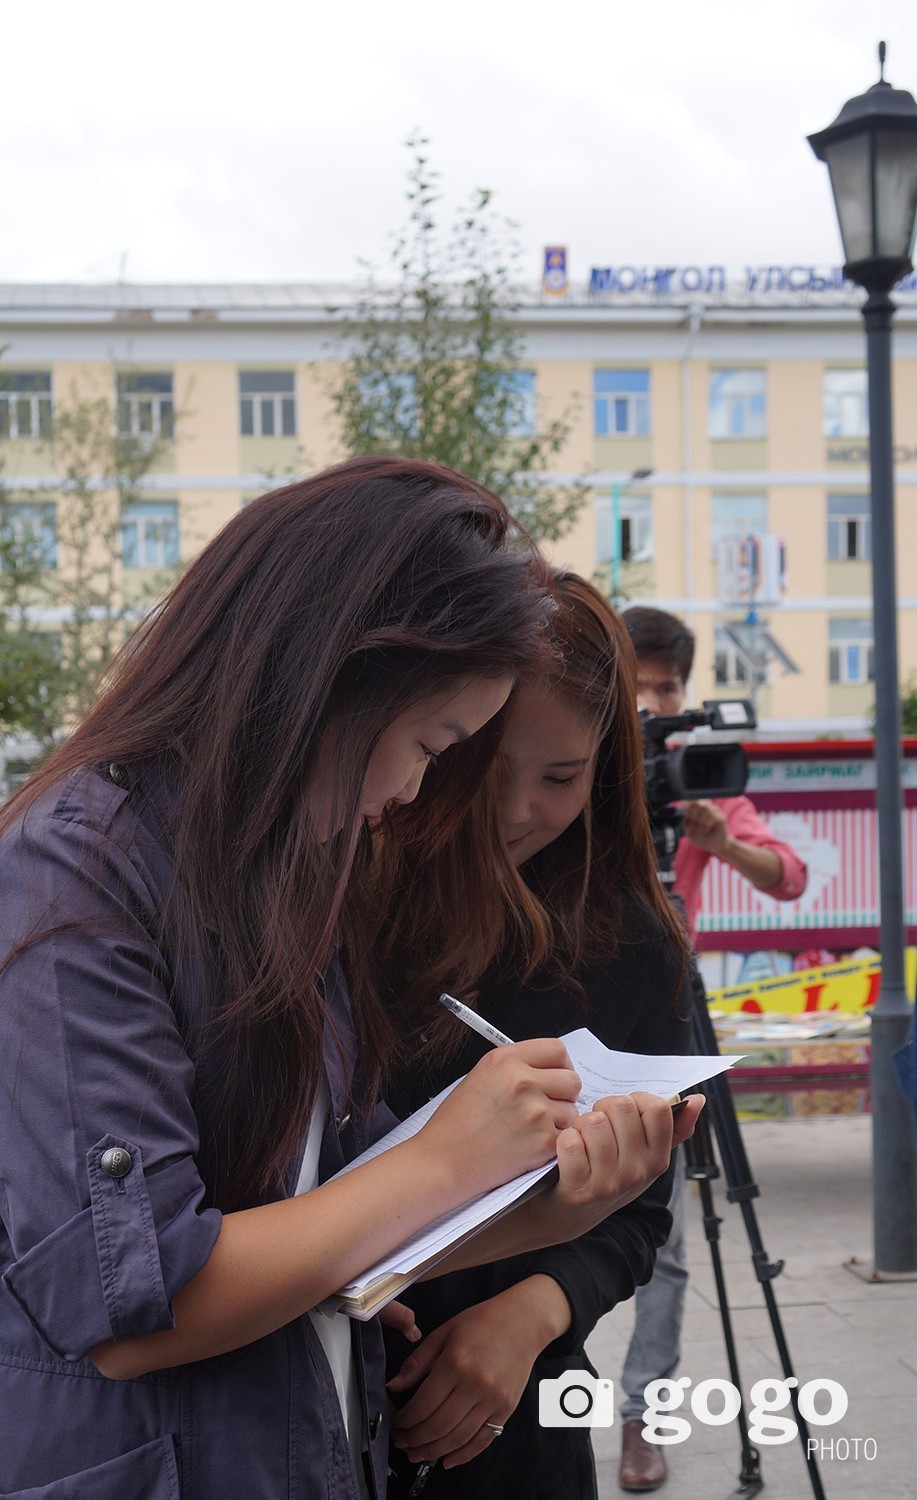 Collecting signatures from students who are protesting against the increase in tuition fees. 